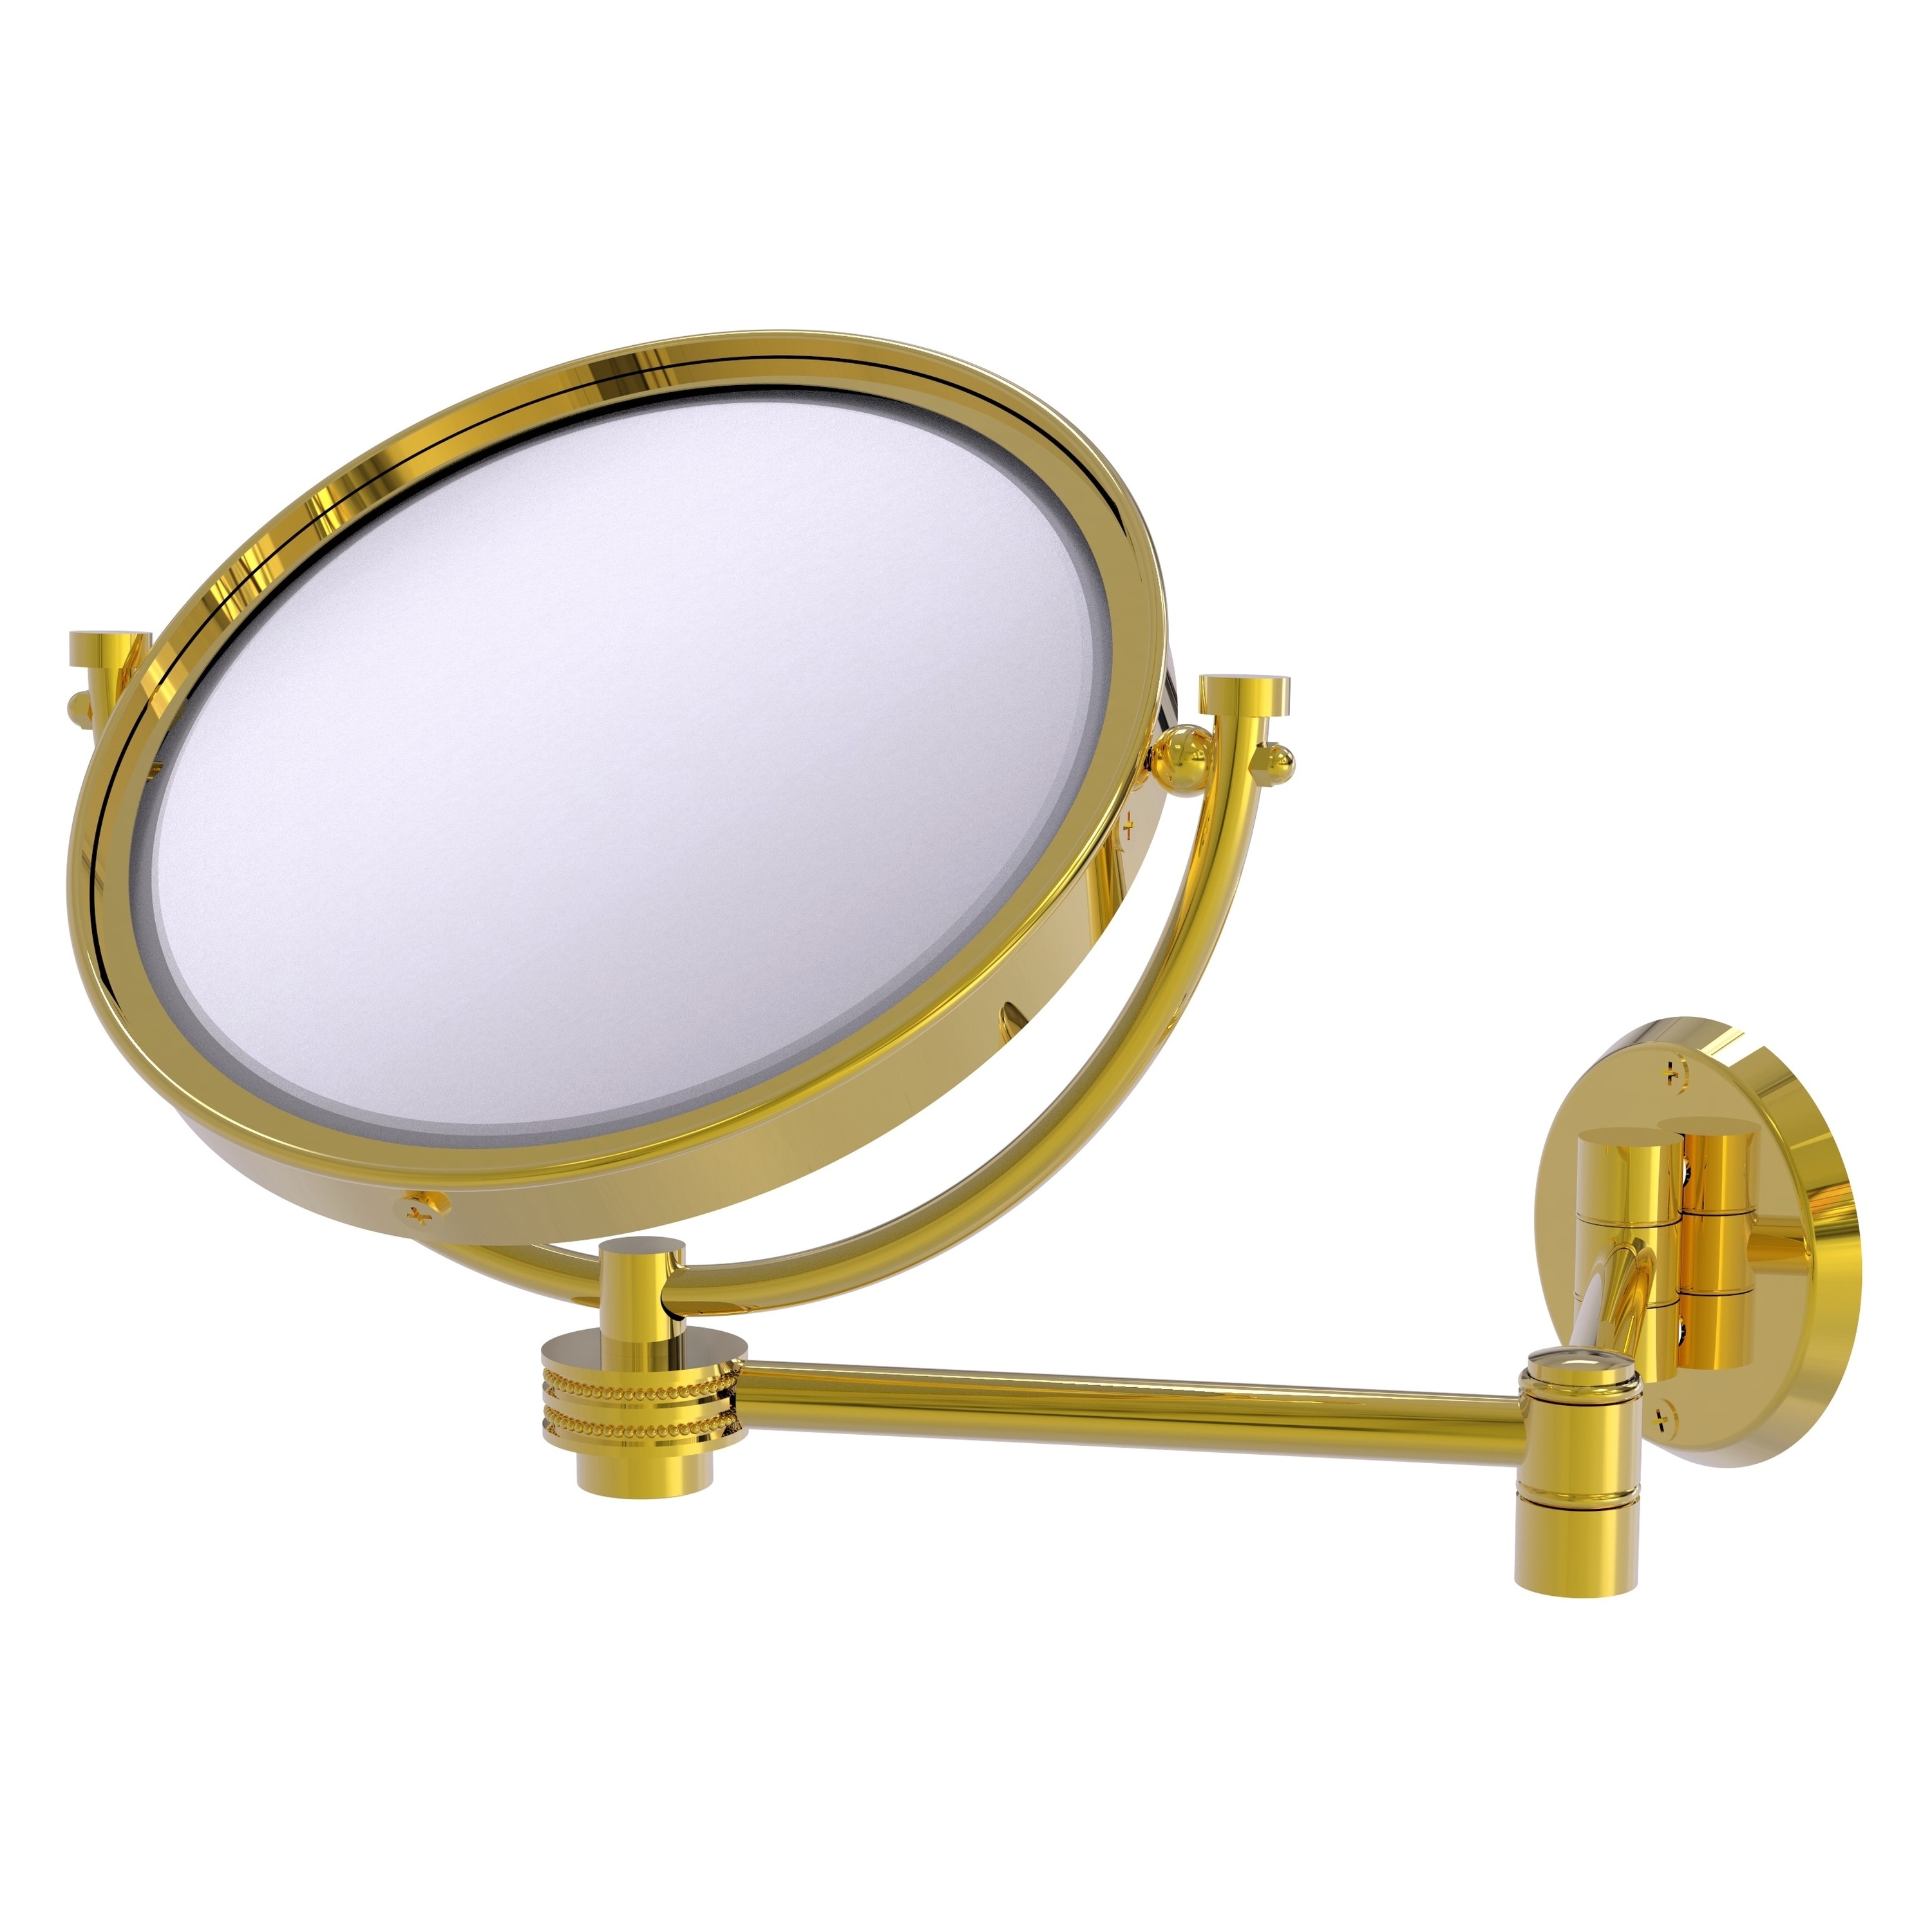 8-in x 10-in Polished Silver Double-sided 2X Magnifying Wall-mounted Vanity Mirror | - Allied Brass WM-6D/2X-PB